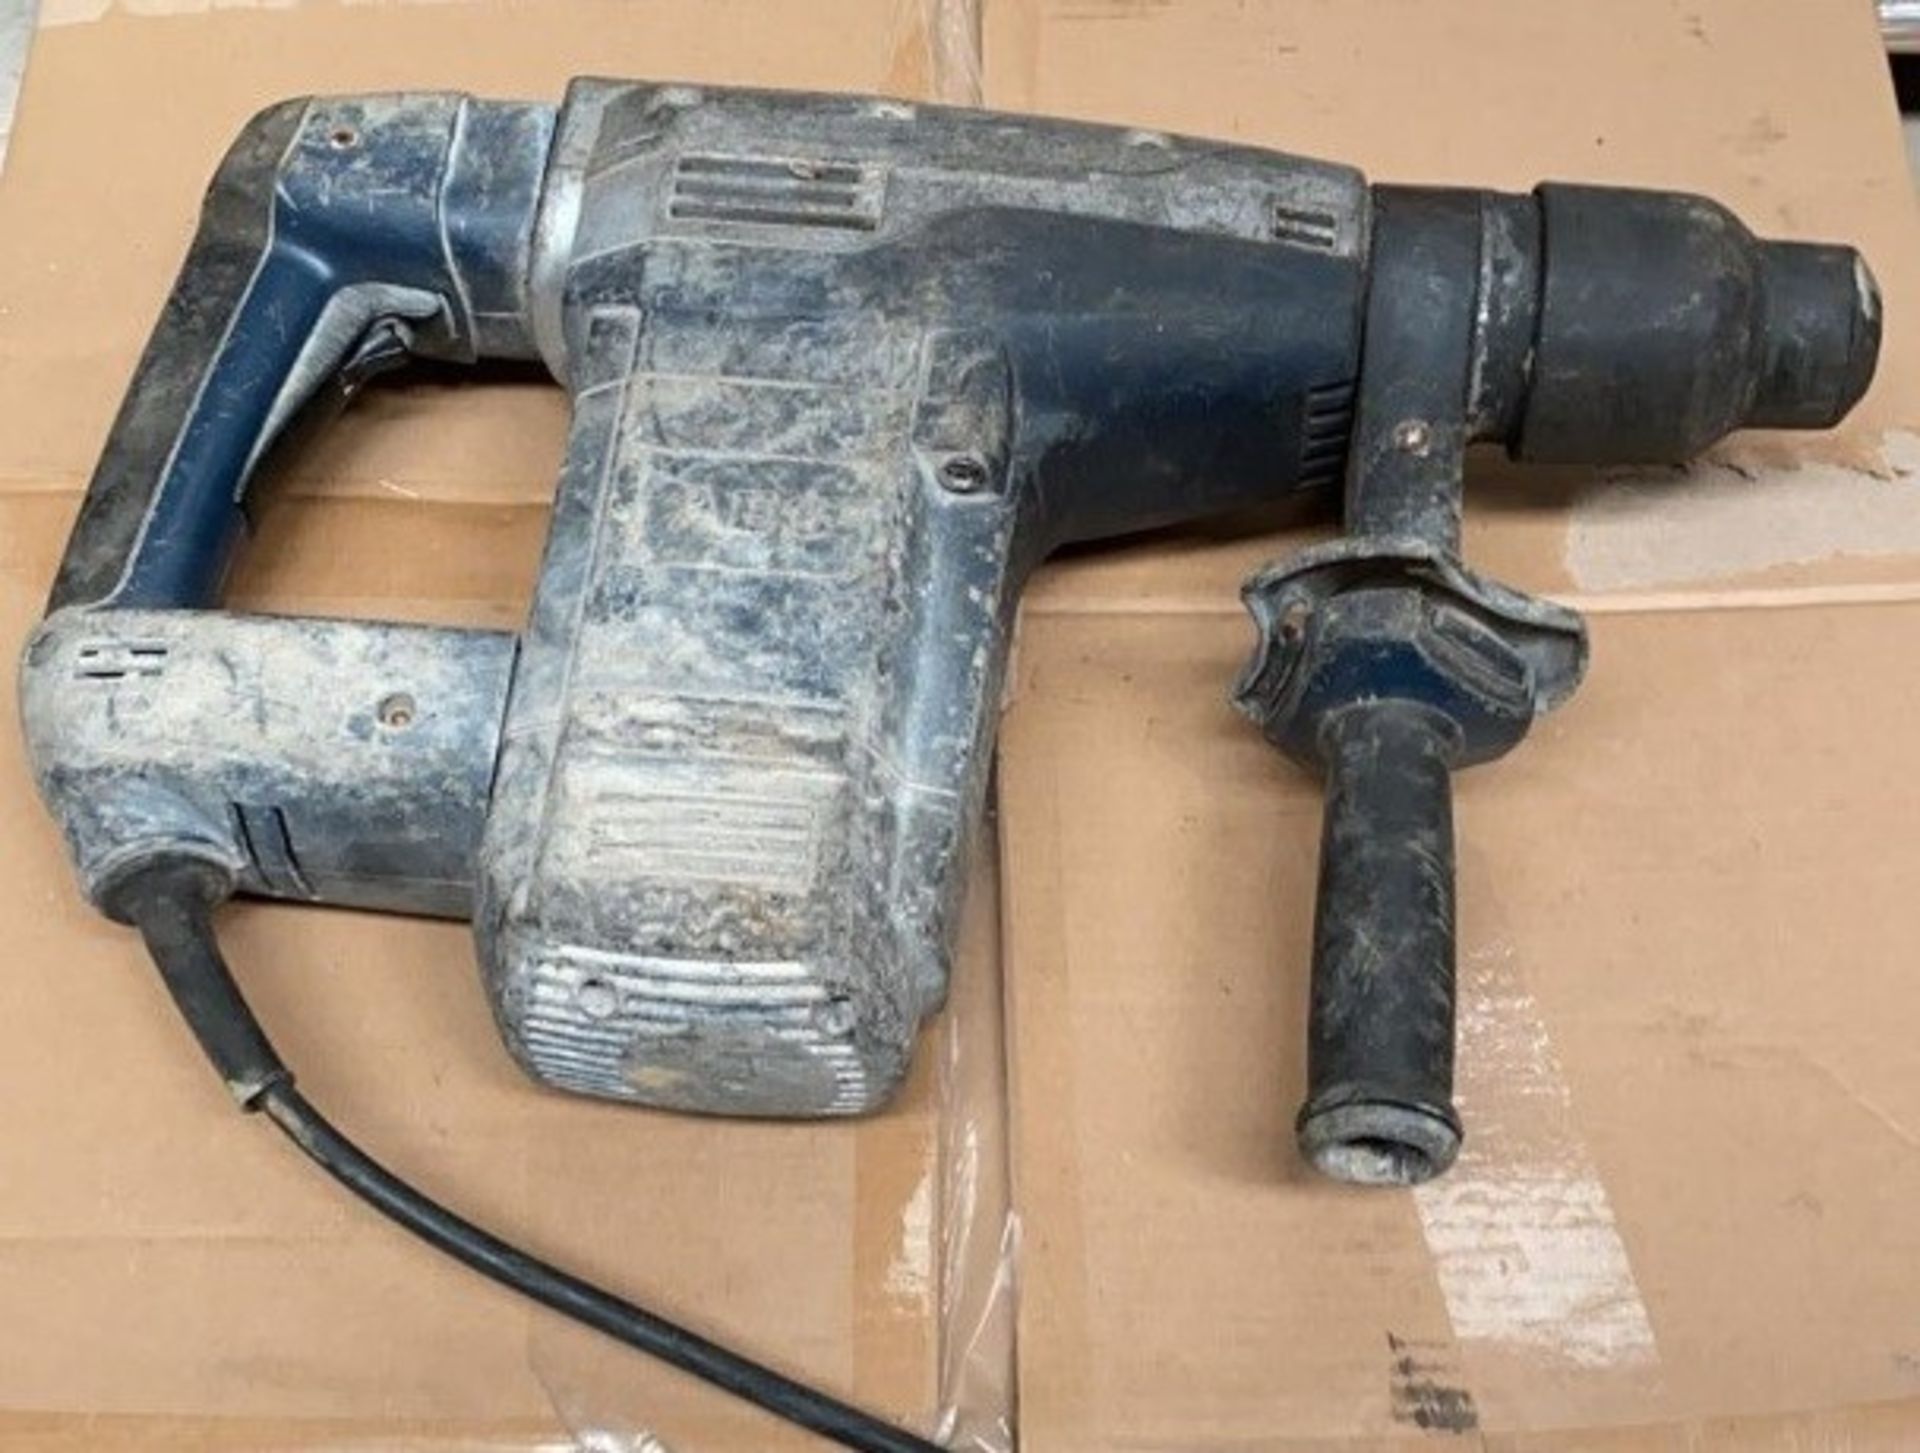 1 x AEG High Impact Drill - Used, Recently Removed From A Working Site - CL505 - Ref: TL016 -